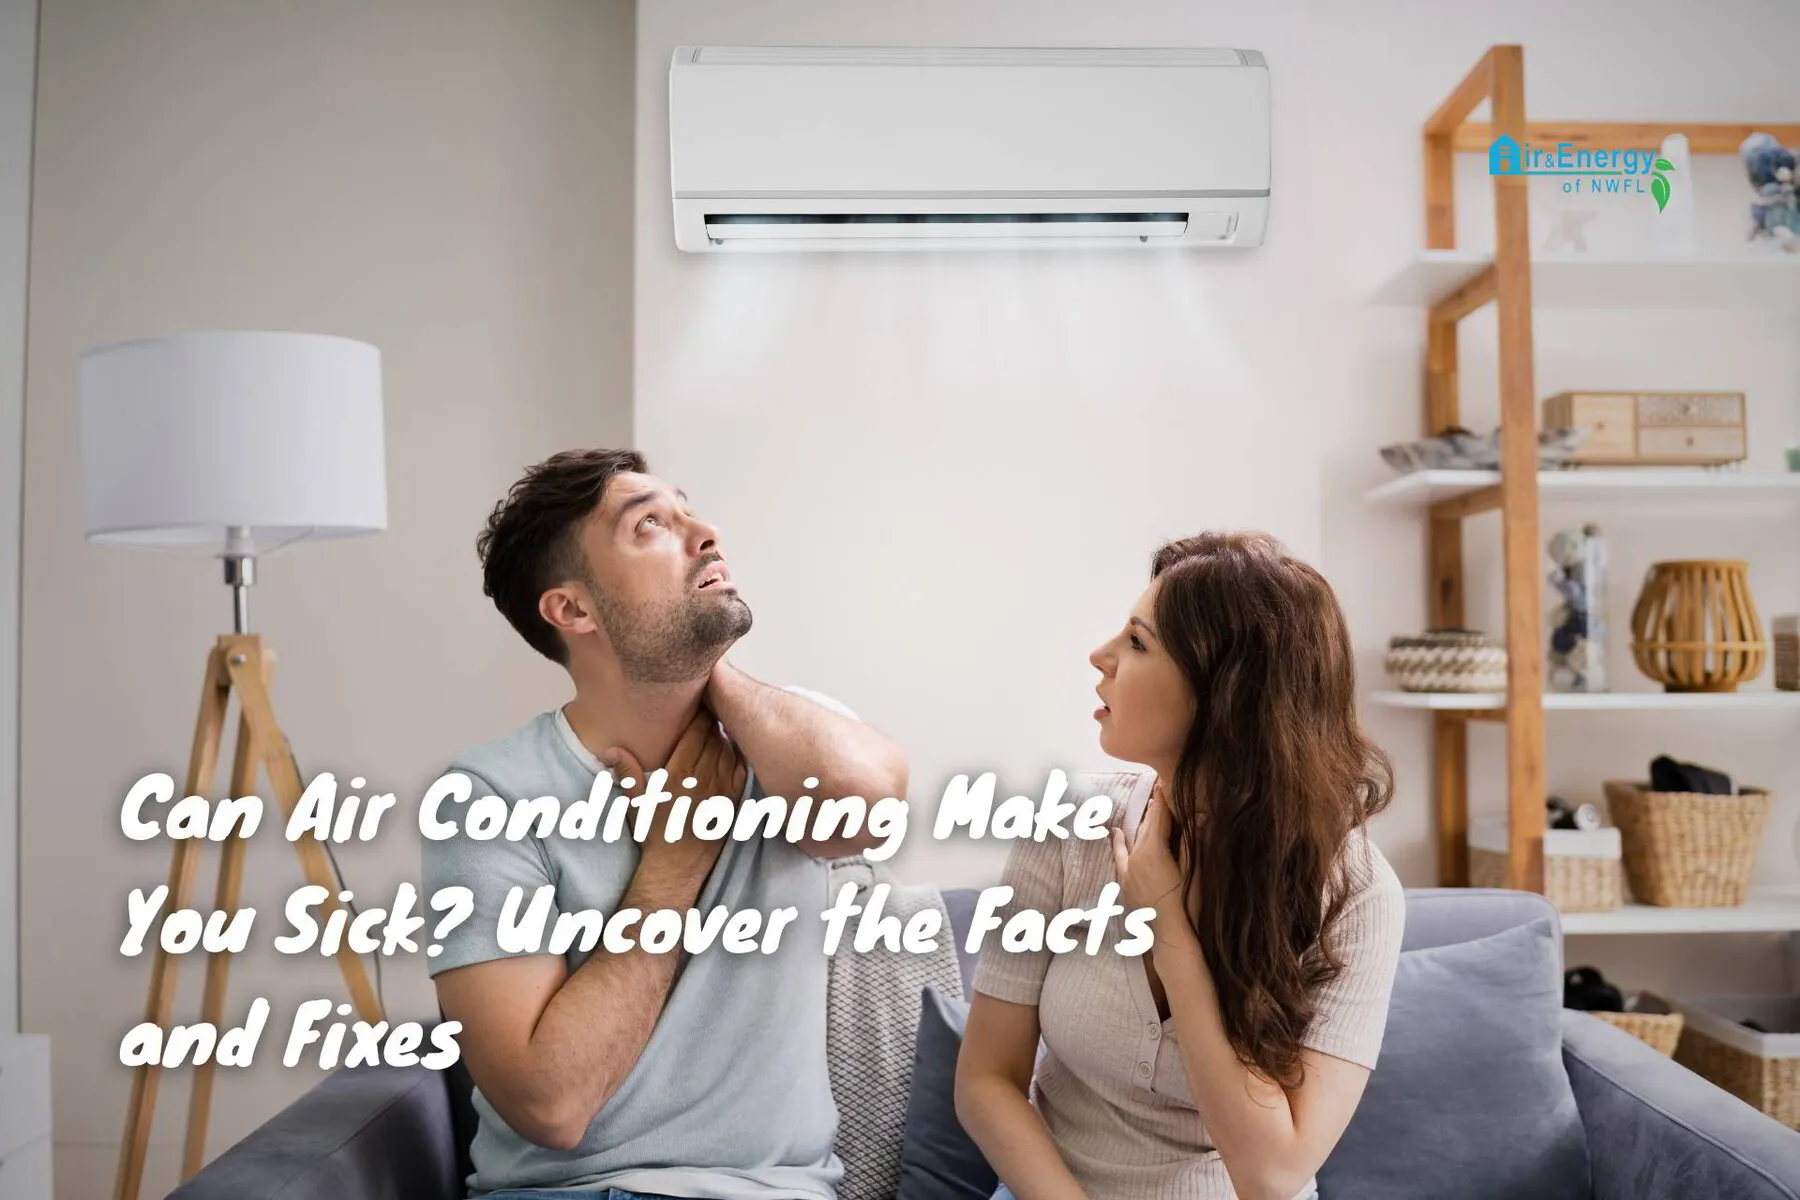 Can Air Conditioning Make You Sick? Uncover the Facts and Fixes | Air &amp; Energy of NWFL